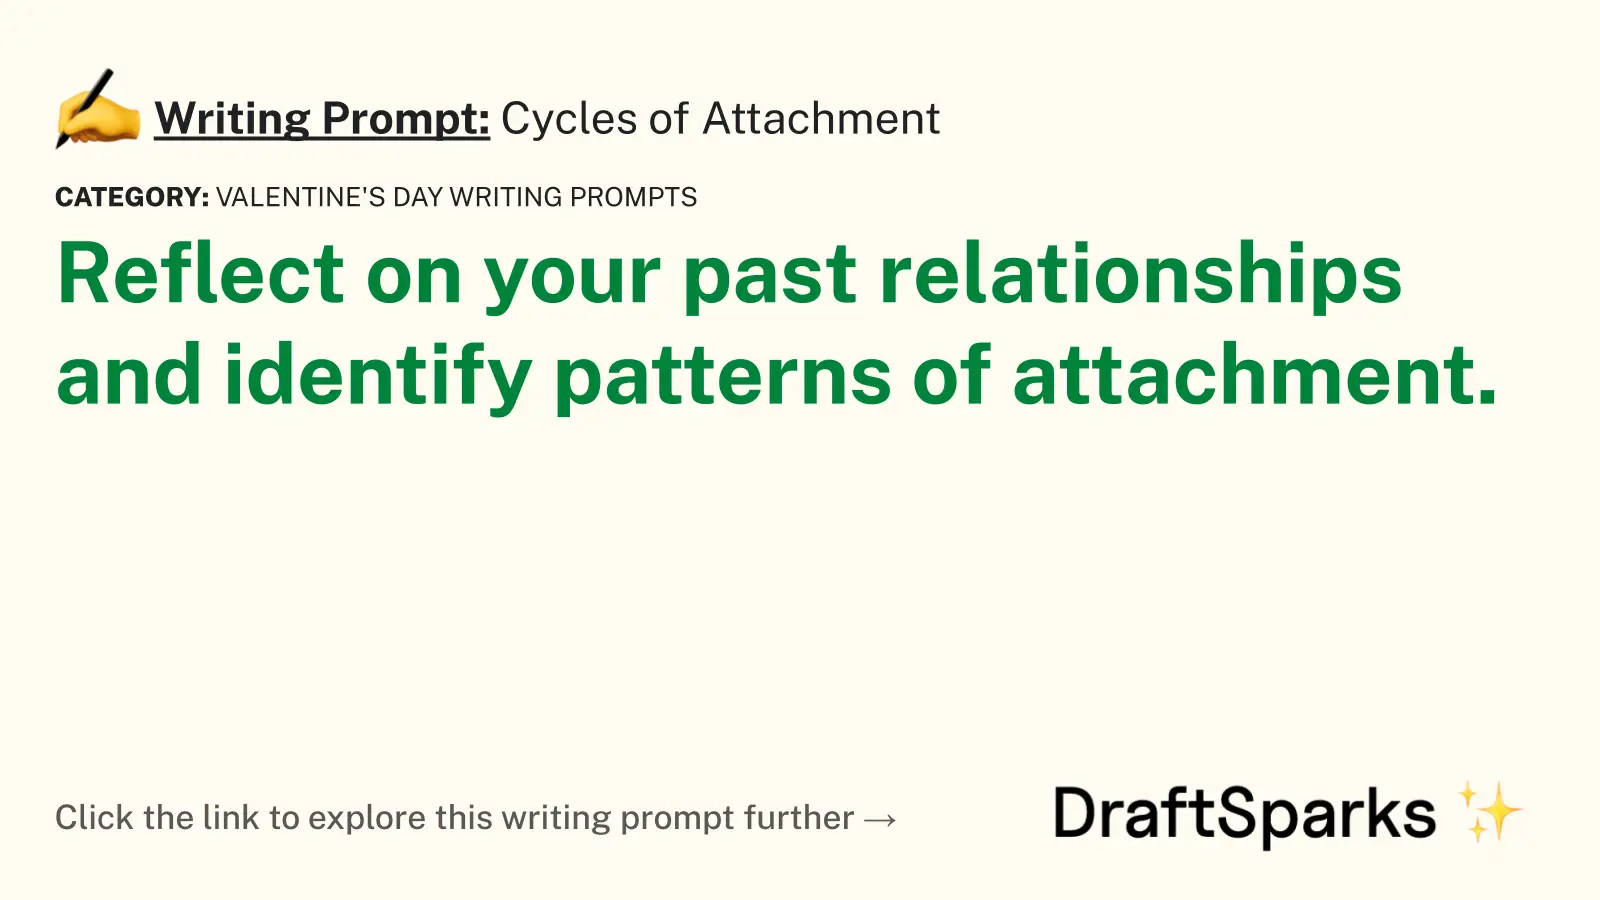 Cycles of Attachment